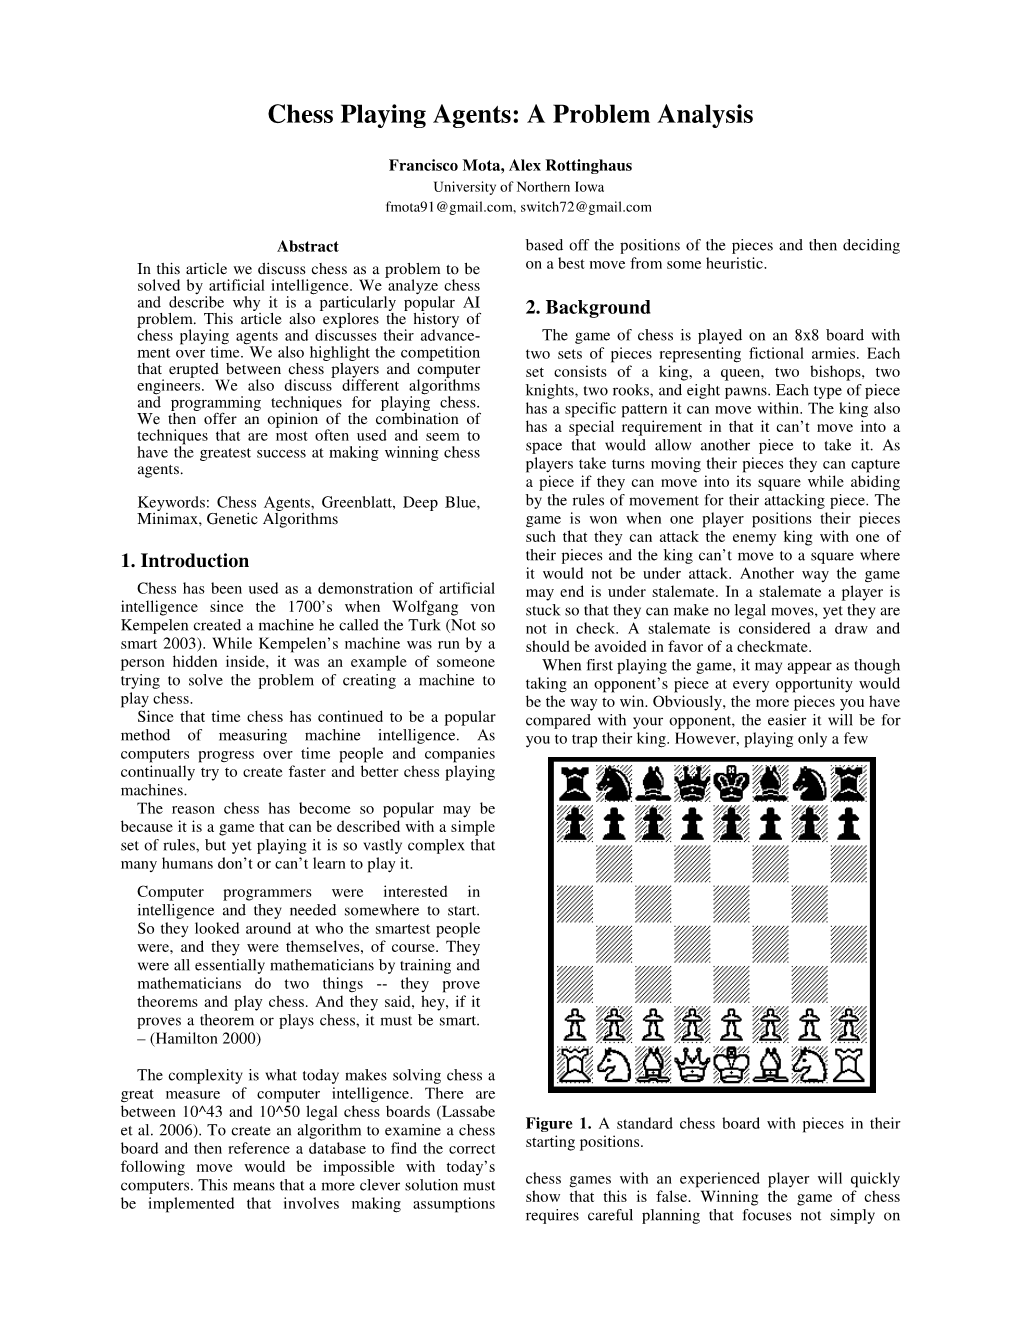 Chess Playing Agents: a Problem Analysis